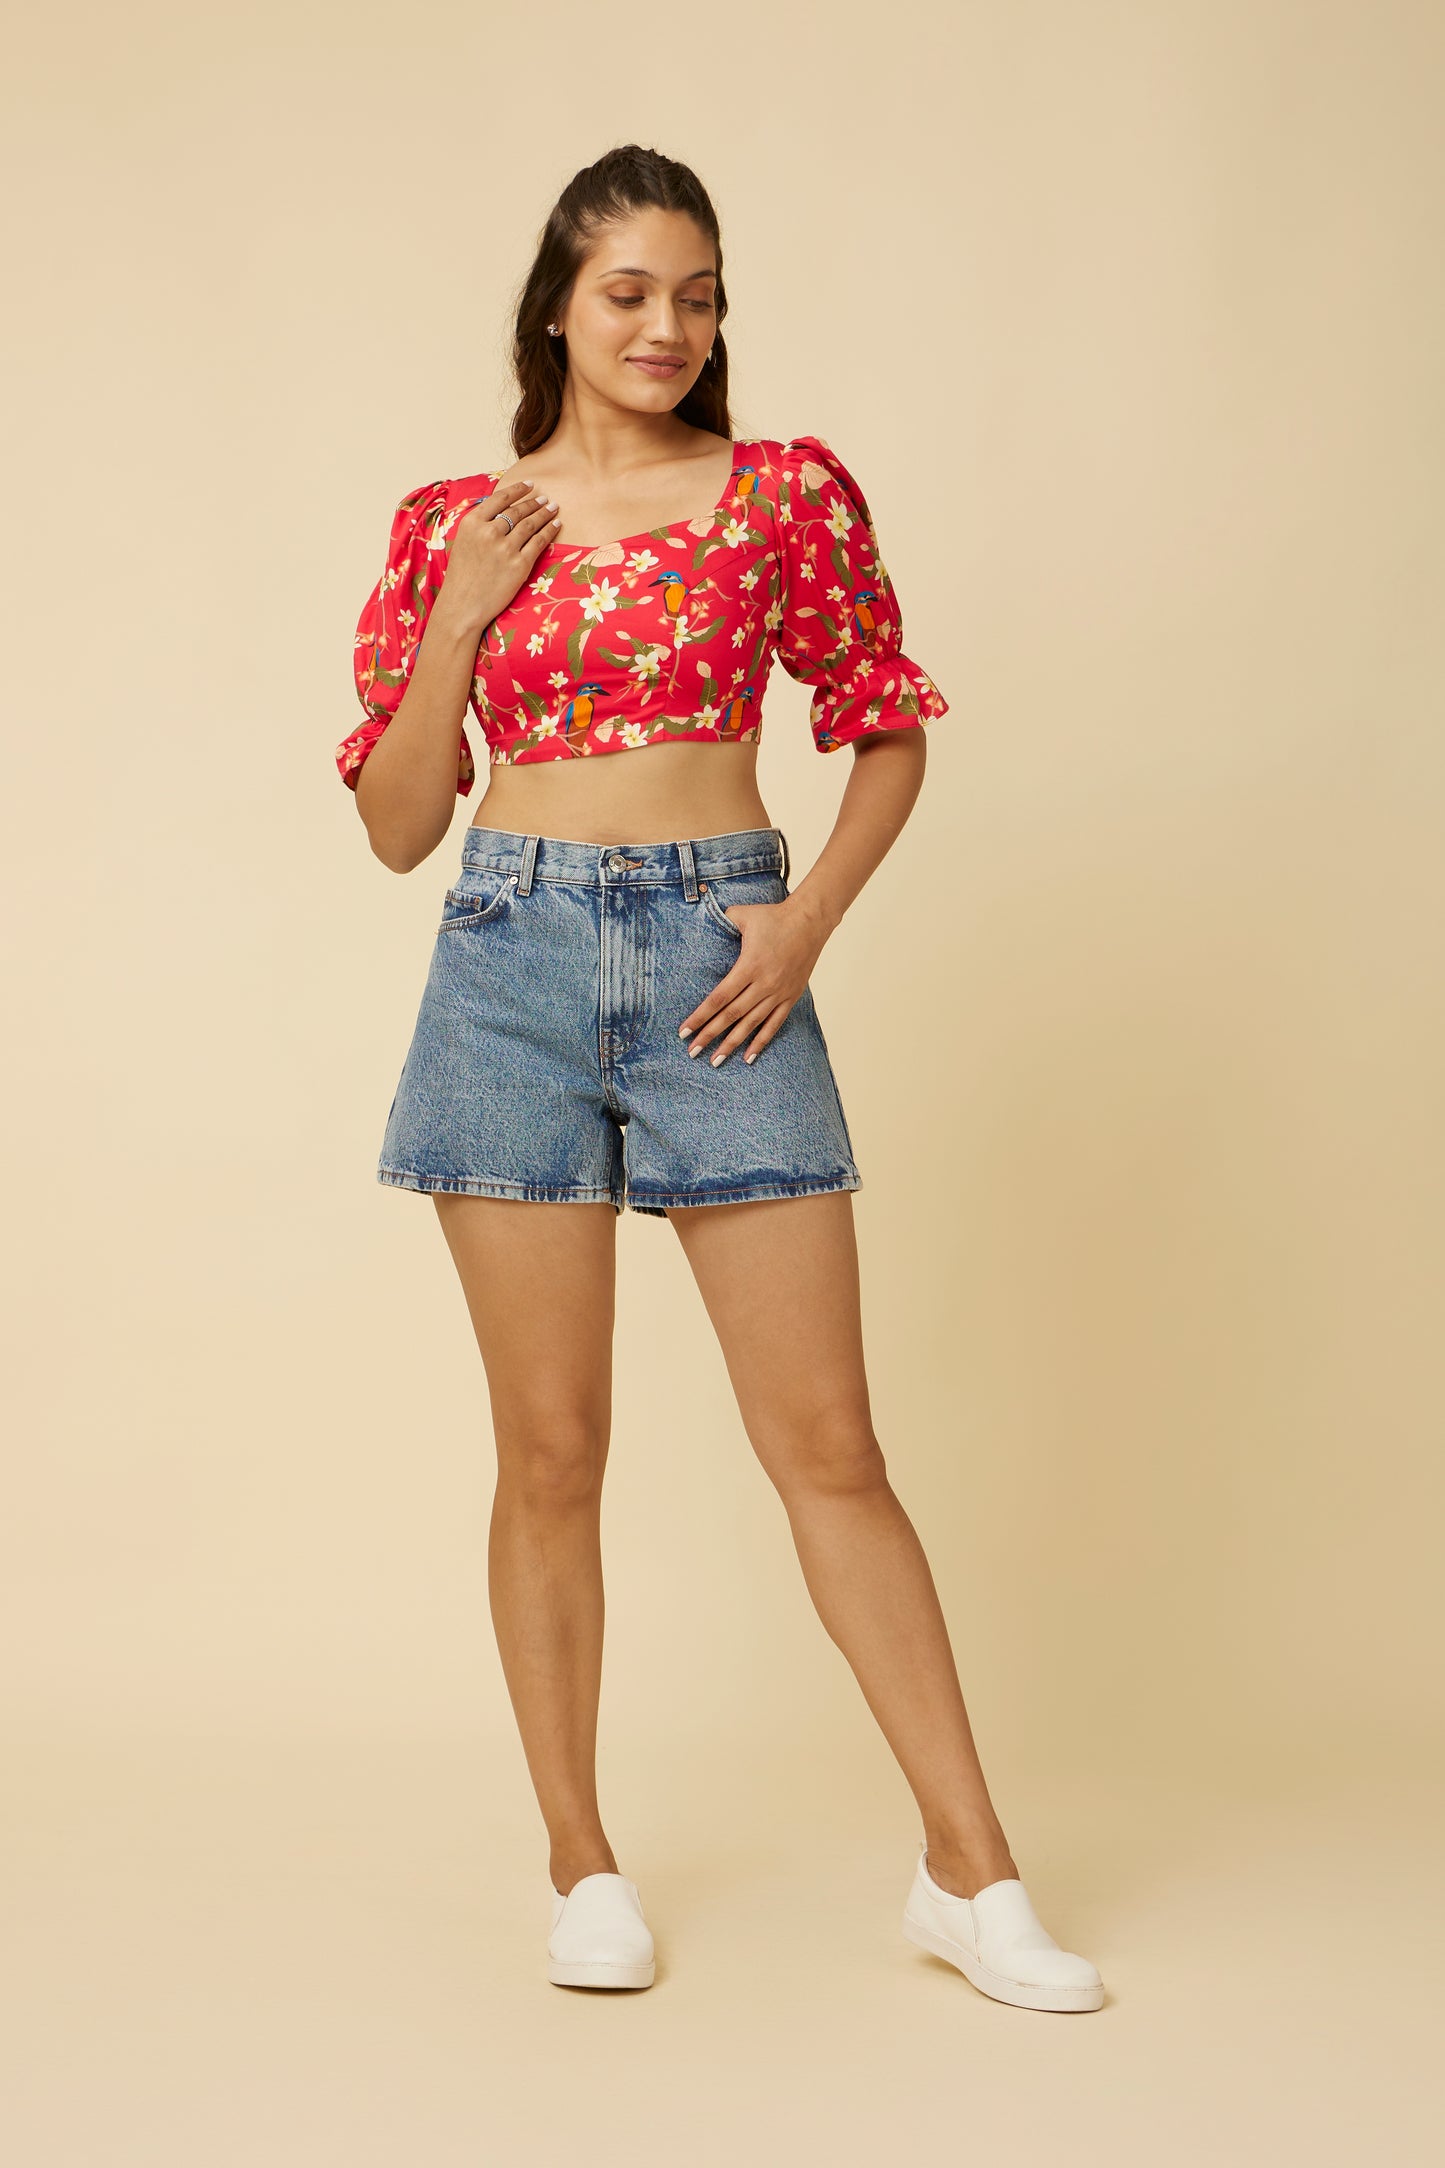 Model poses with hand on hip in the Crimson Summery Crop Top, showcasing the full charm of the floral pattern, complemented by the striking sweetheart neckline and contemporary puff sleeves.